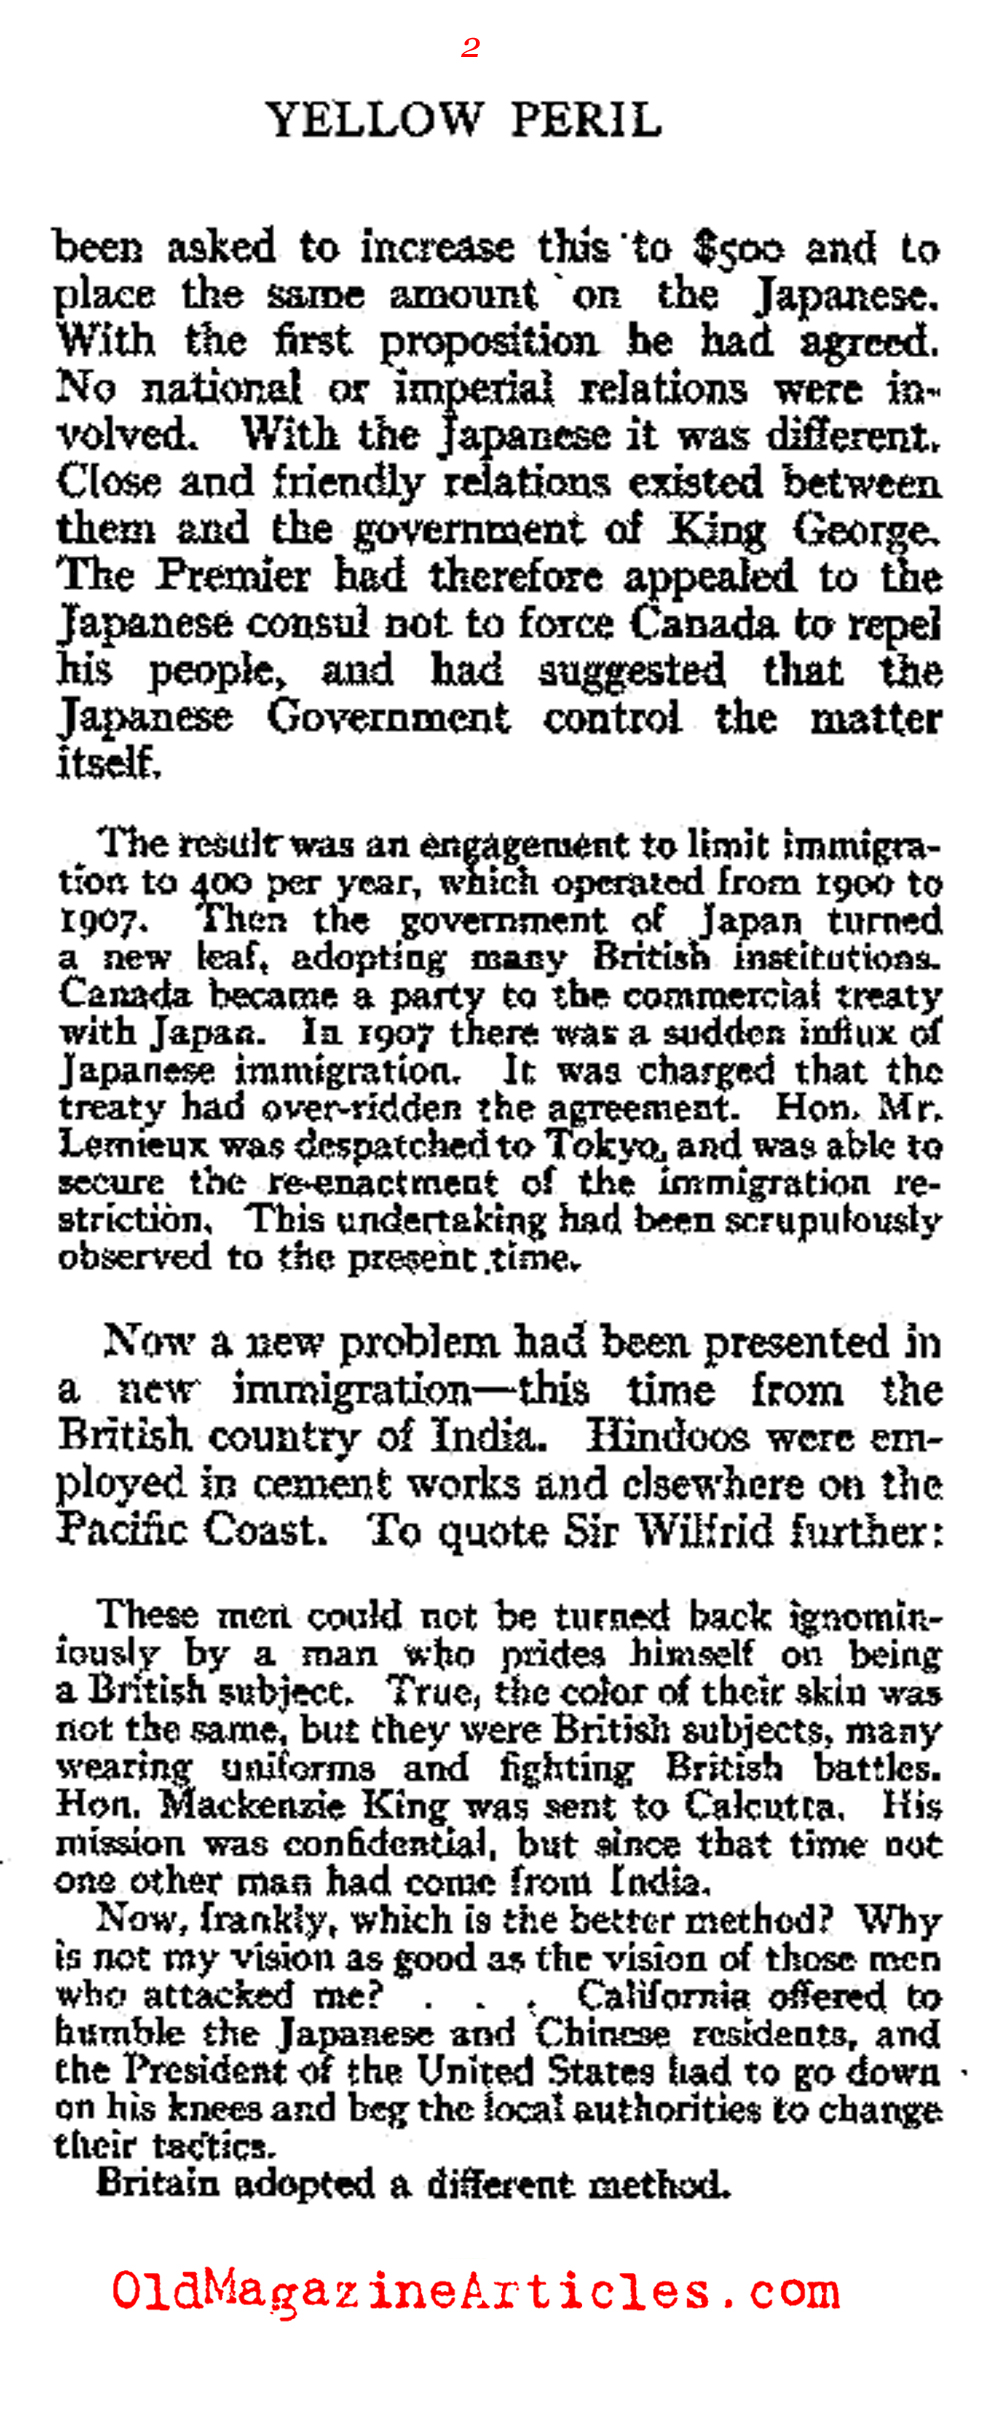 The Yellow Peril in Vancouver   (Review of Reviews, 1910)